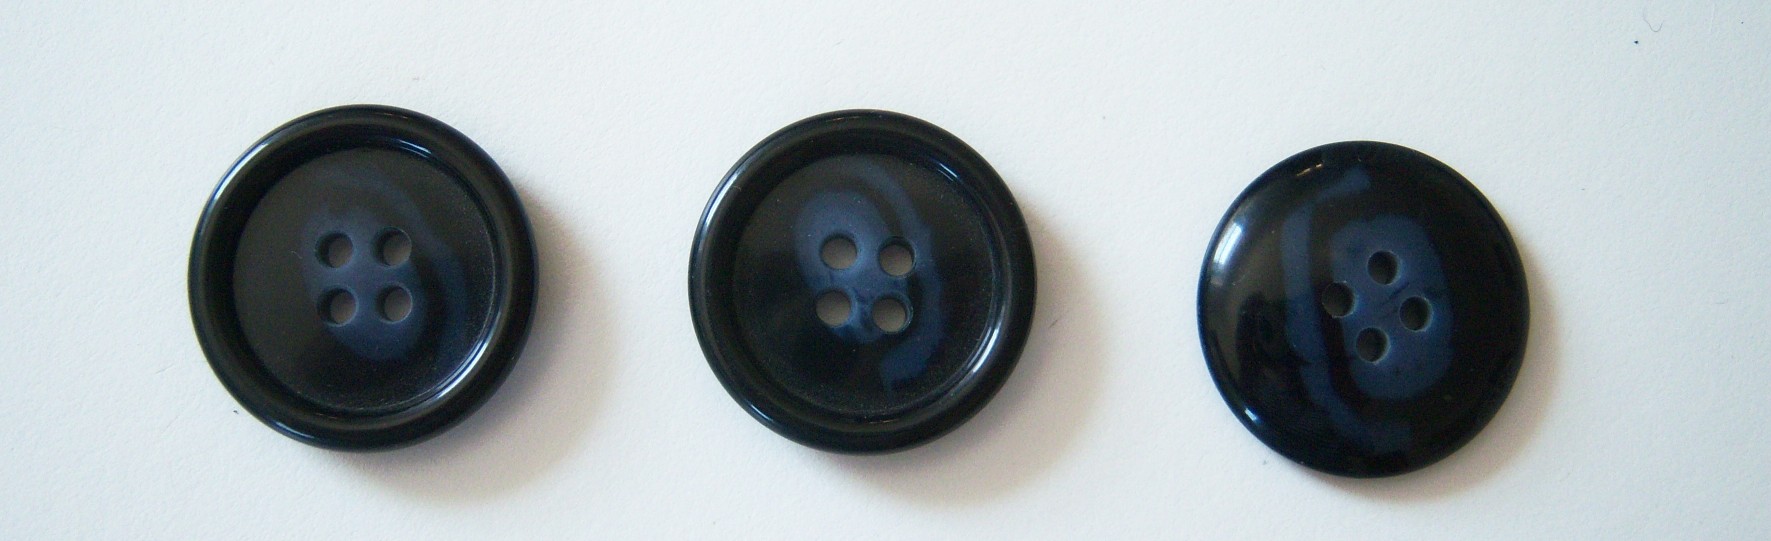 Shiny Navy/Blue Marbled 1" 4 Hole Button